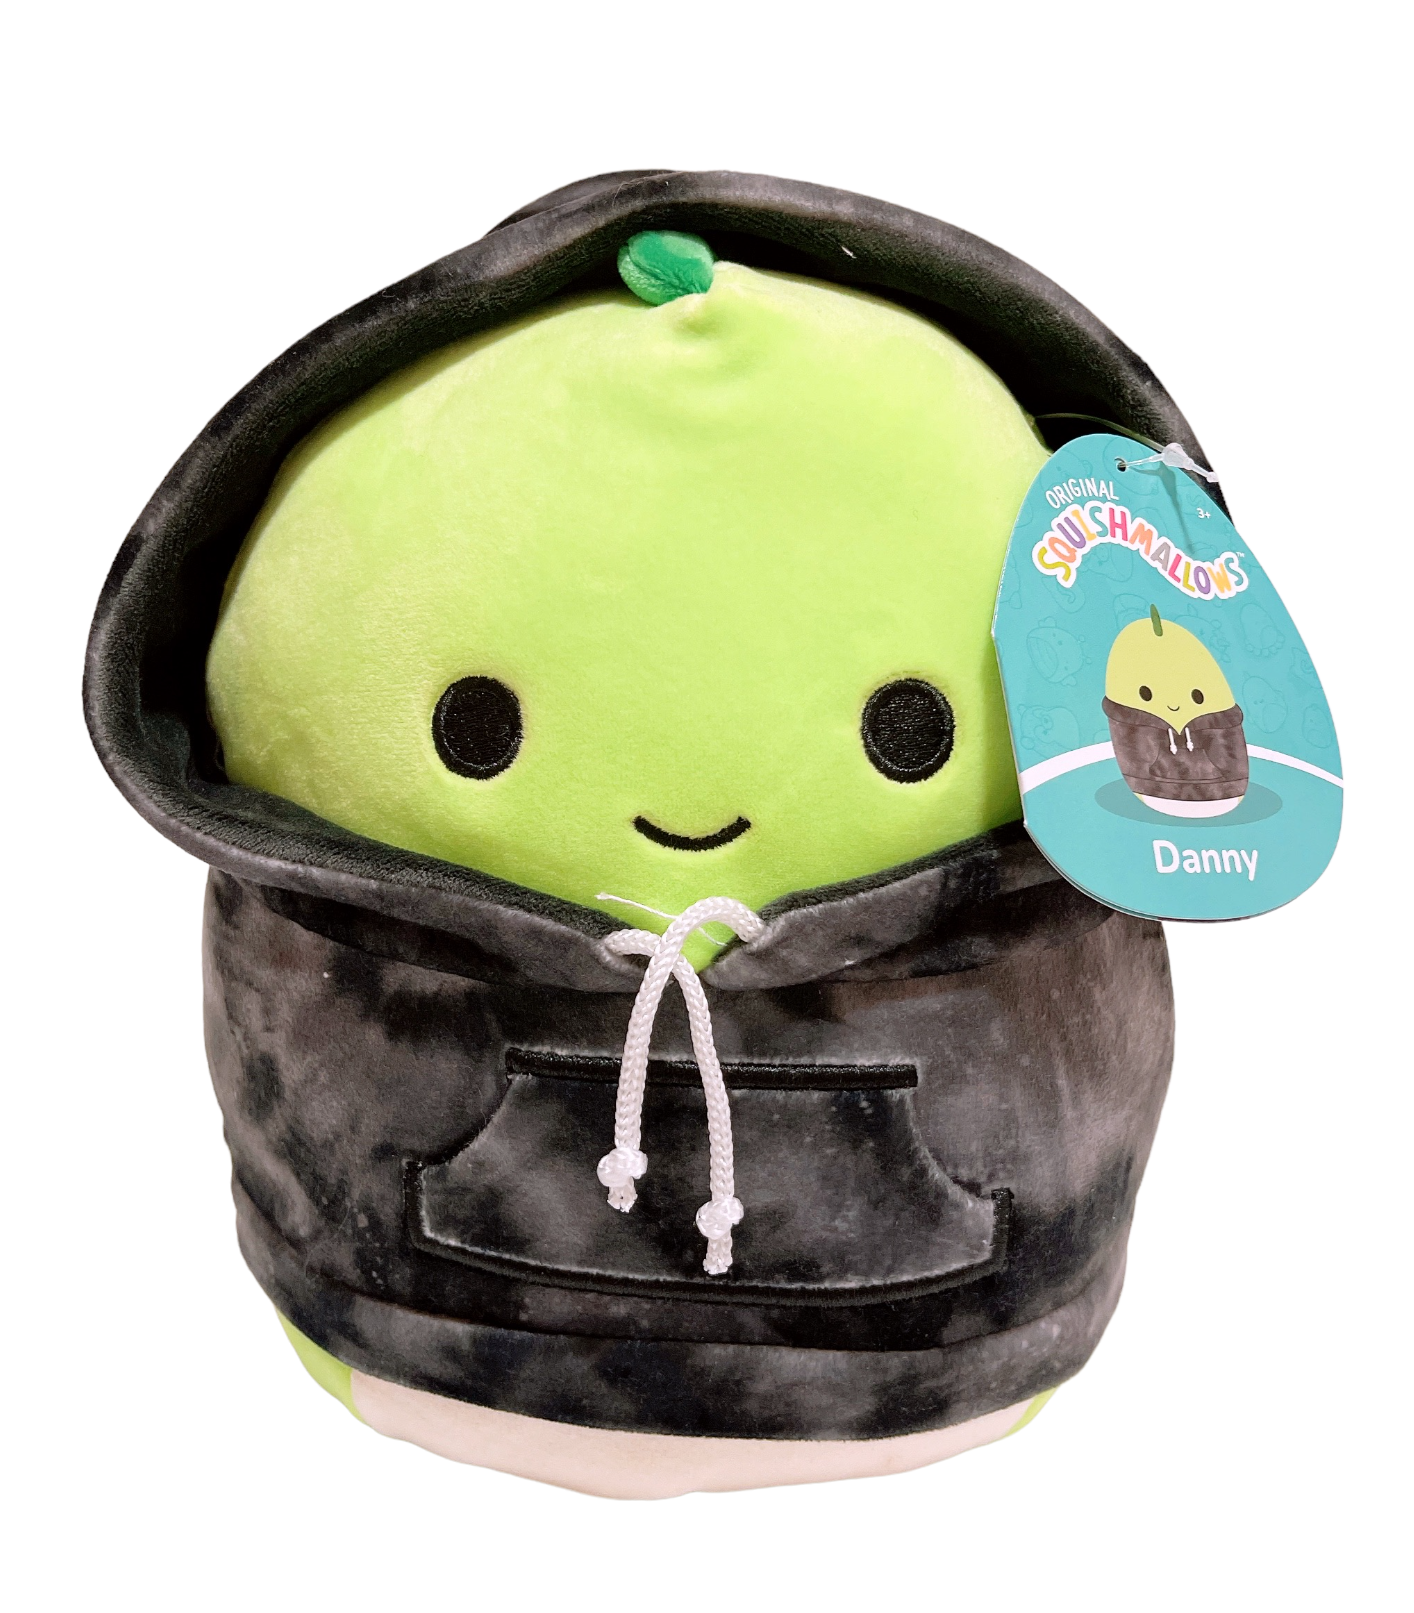 Squishmallows Hoodie Animal Squad 8" Danny the Green Dino Plush Doll Super Soft - image 2 of 3